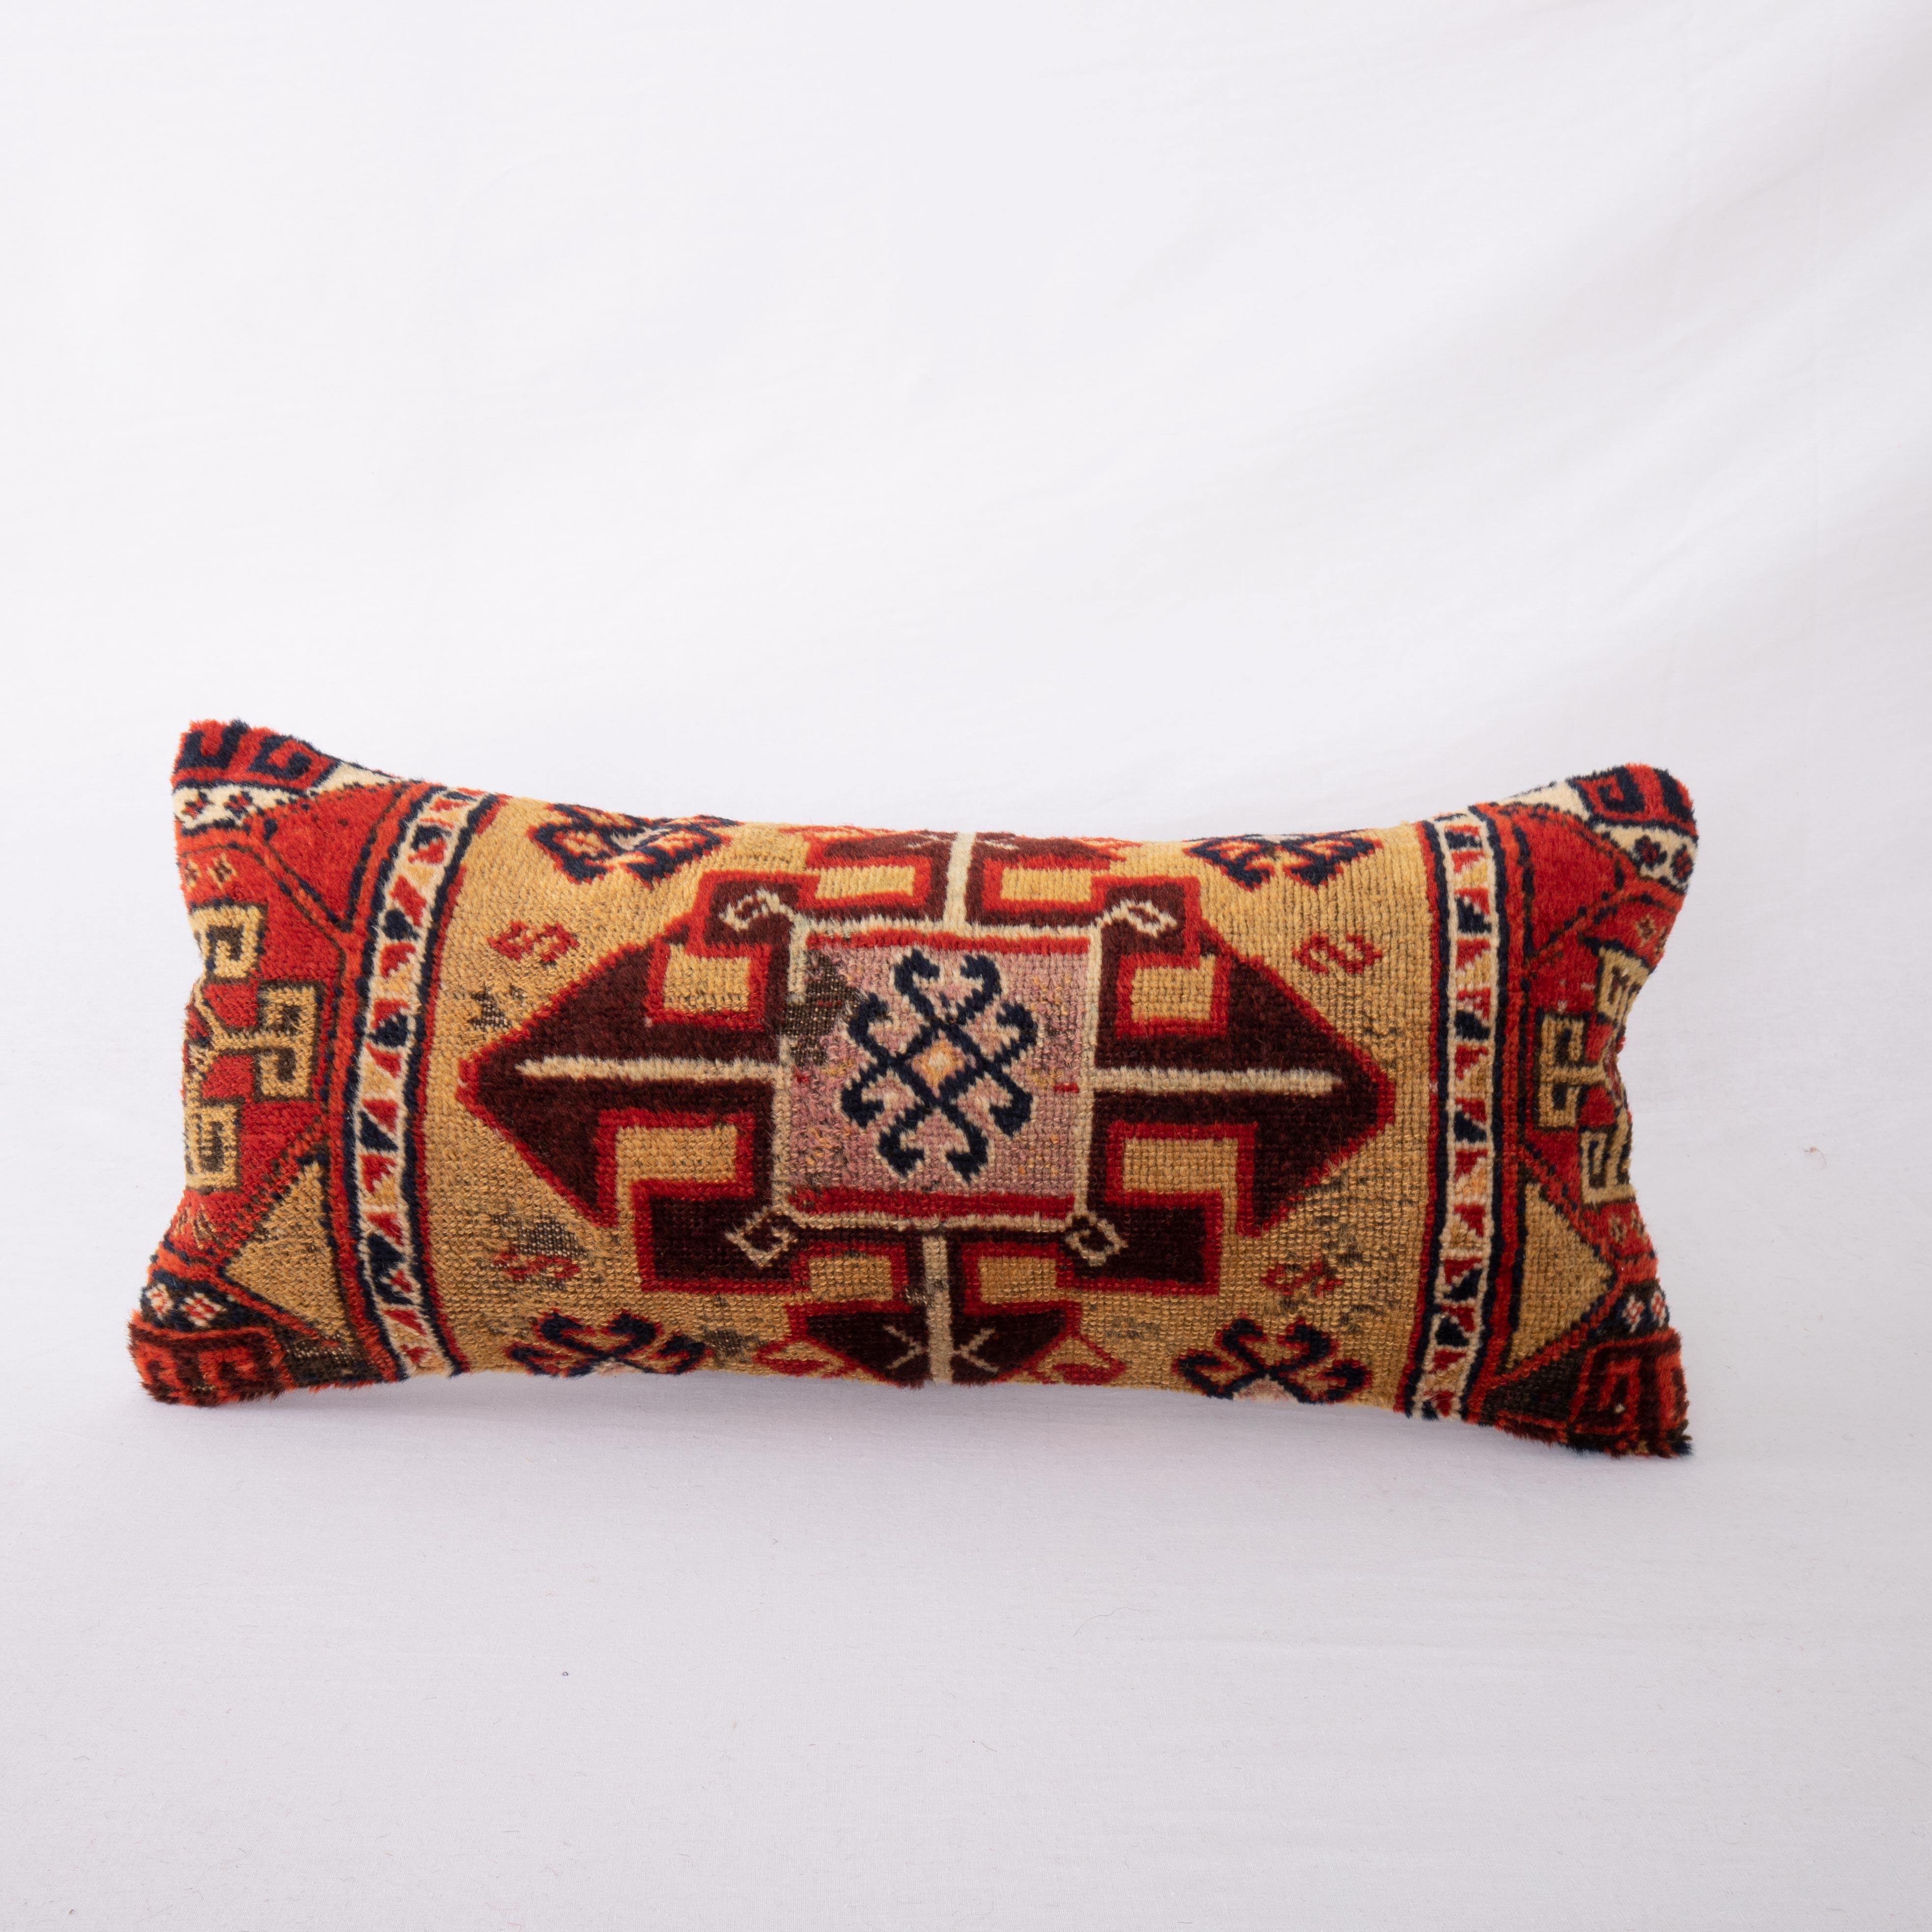 Eastern Anatolian rugs are famous for their wool and color quality. This pillow cover is made from a fragment of a such a great rug.

It does not come with an Insert.
Cotton in the back.
Zipper closure.
Dry clean is recommended.
